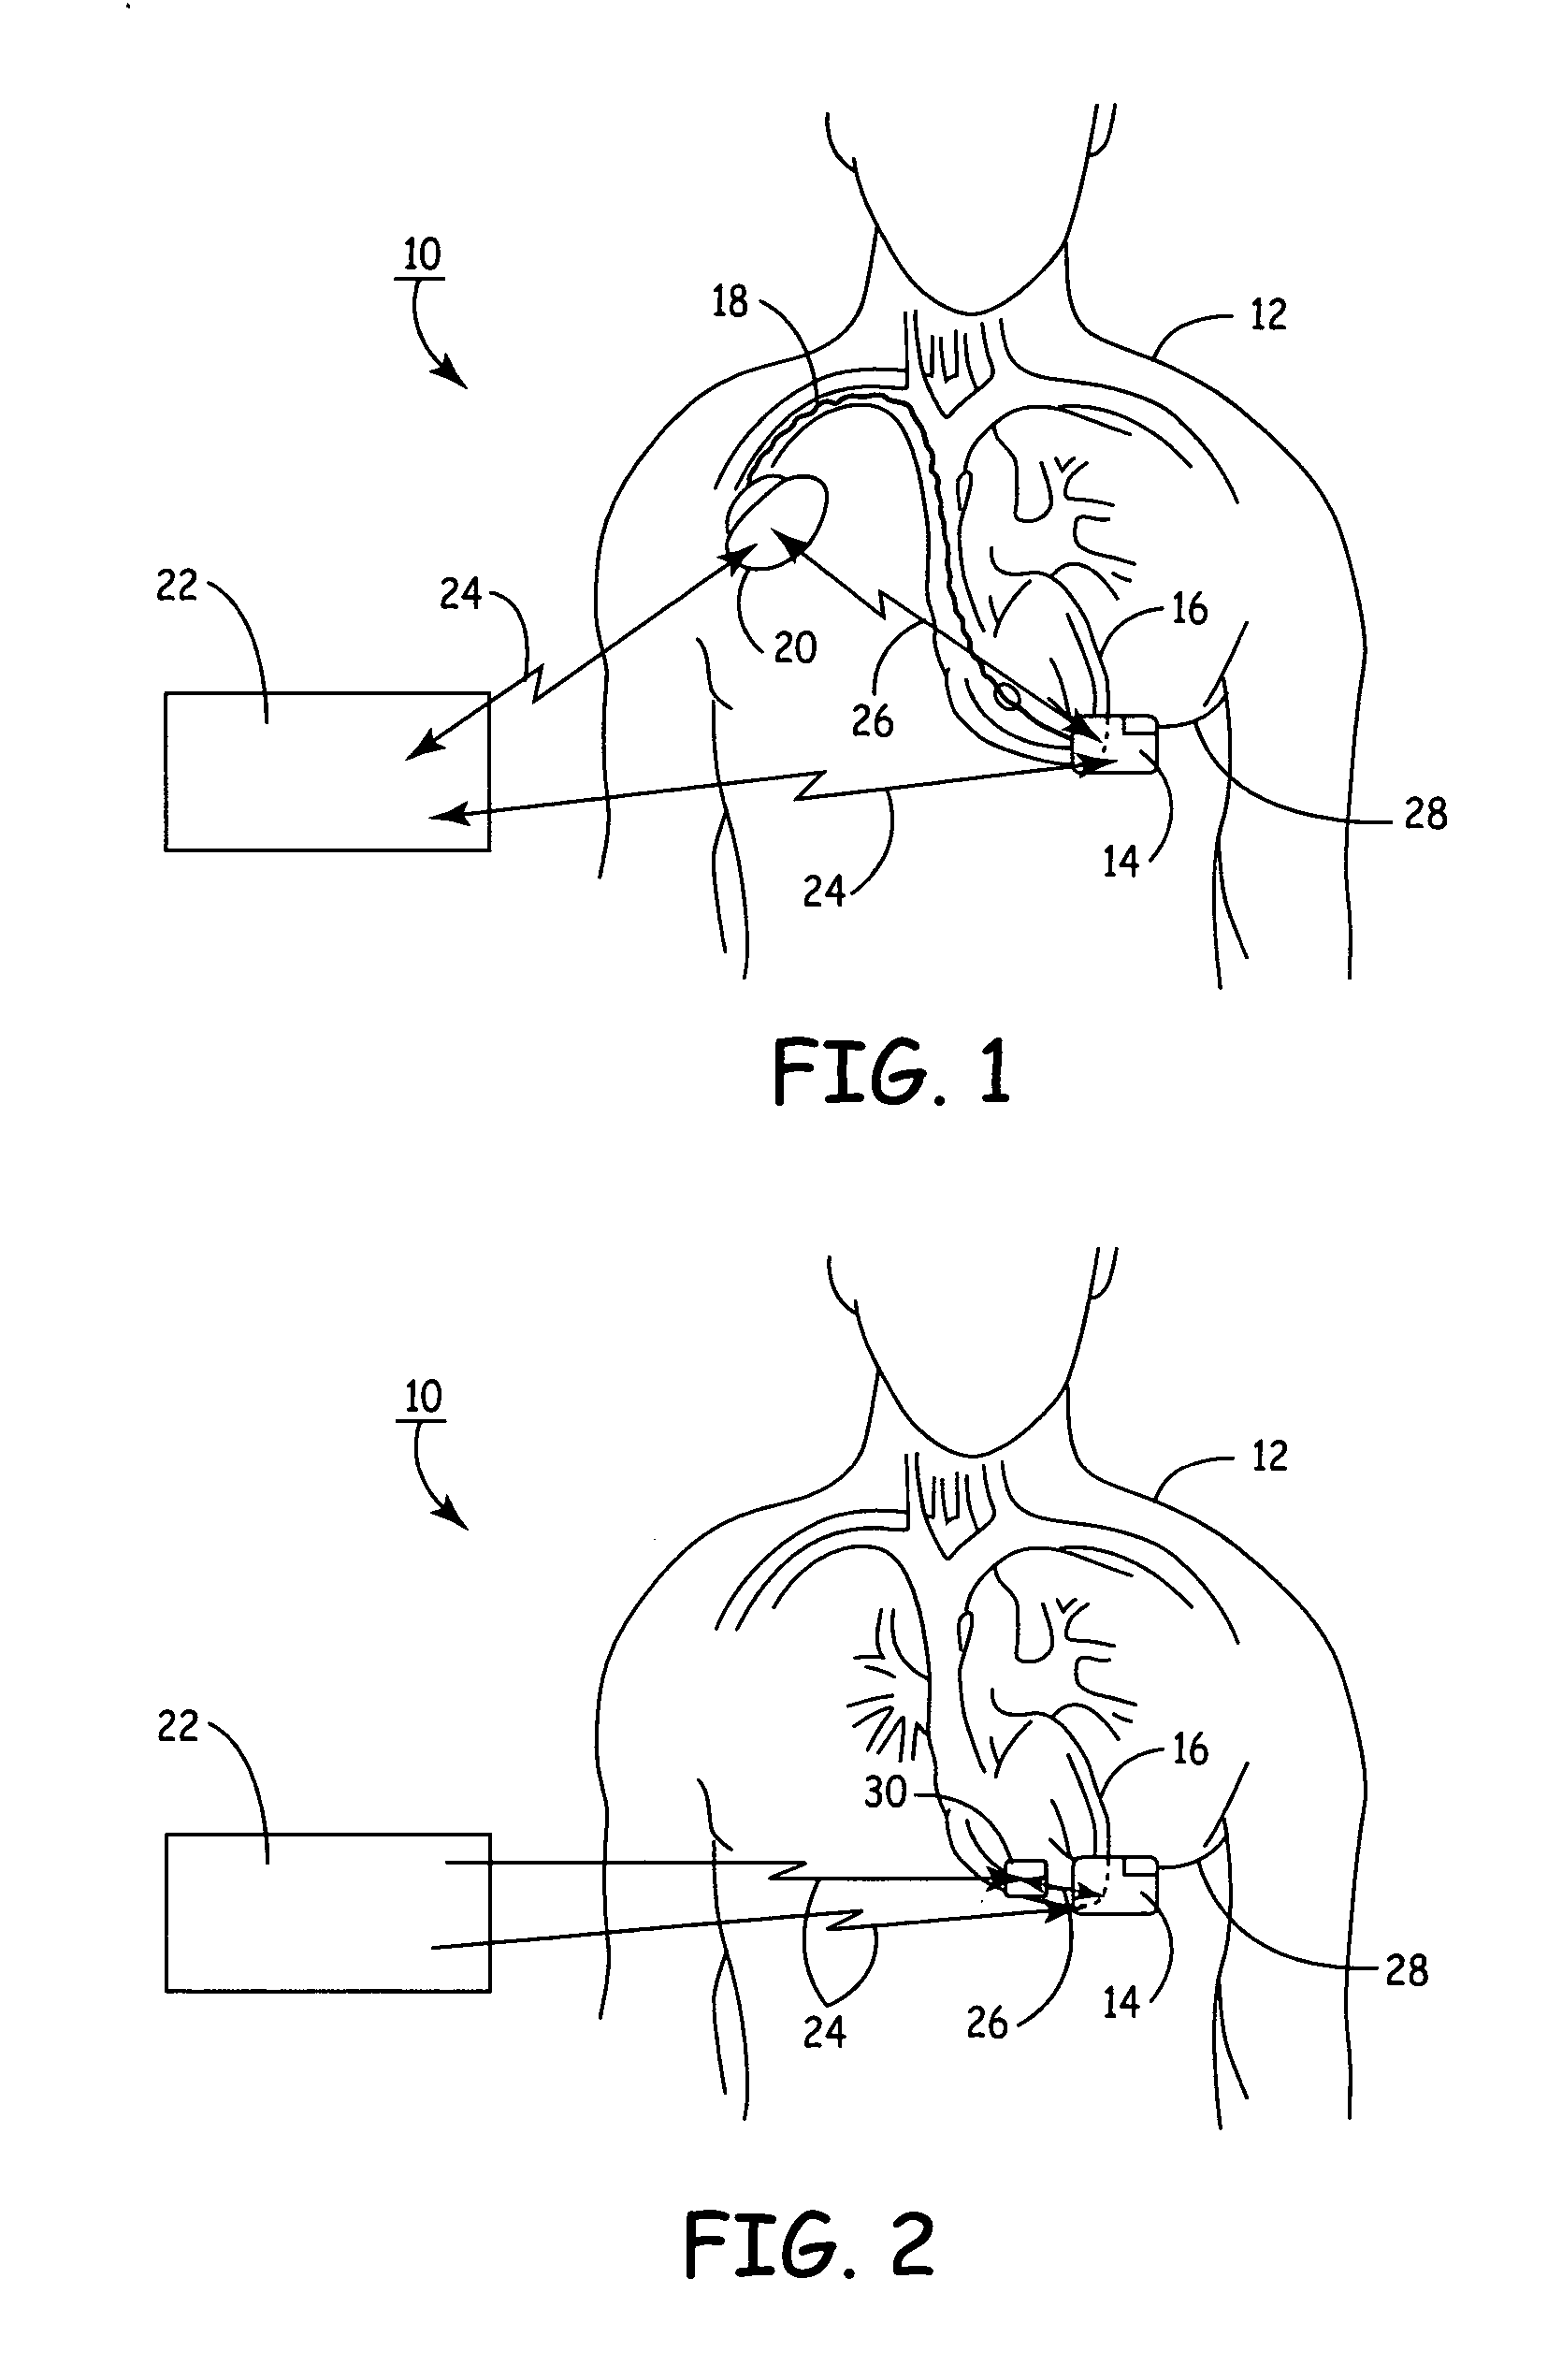 Remotely enabled pacemaker and implantable subcutaneous cardioverter/defibrillator system